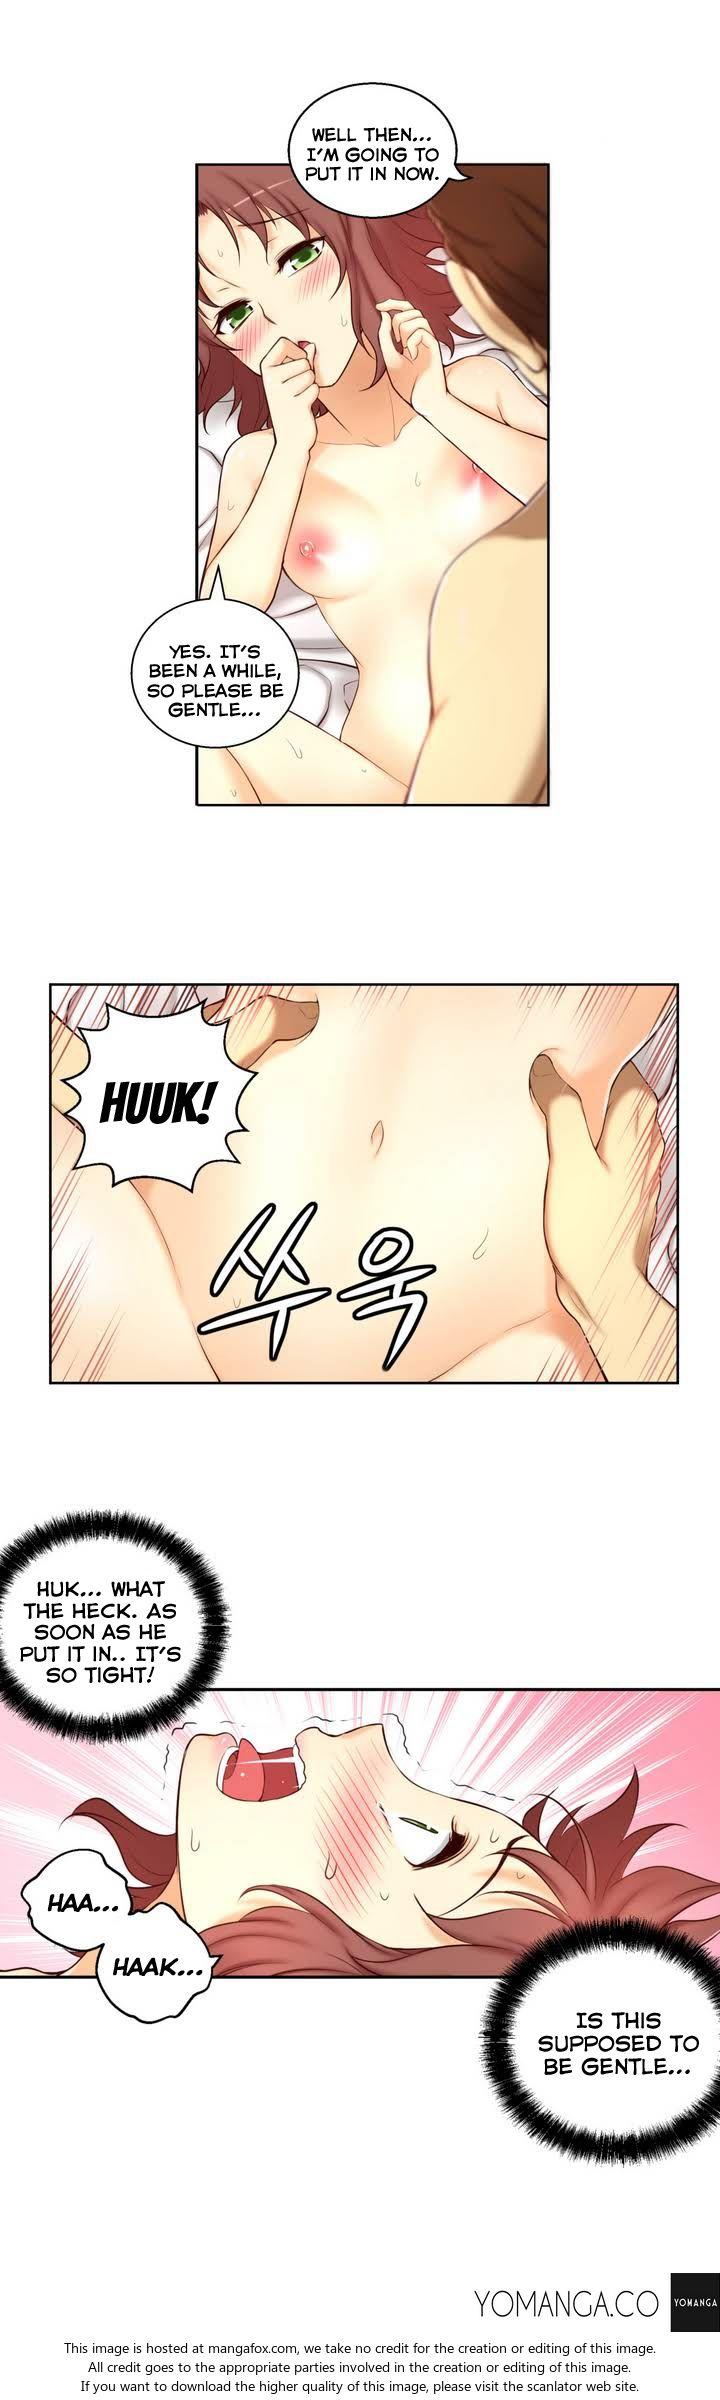 [Donggul Gom] She is Young (English) Part 1/2 879